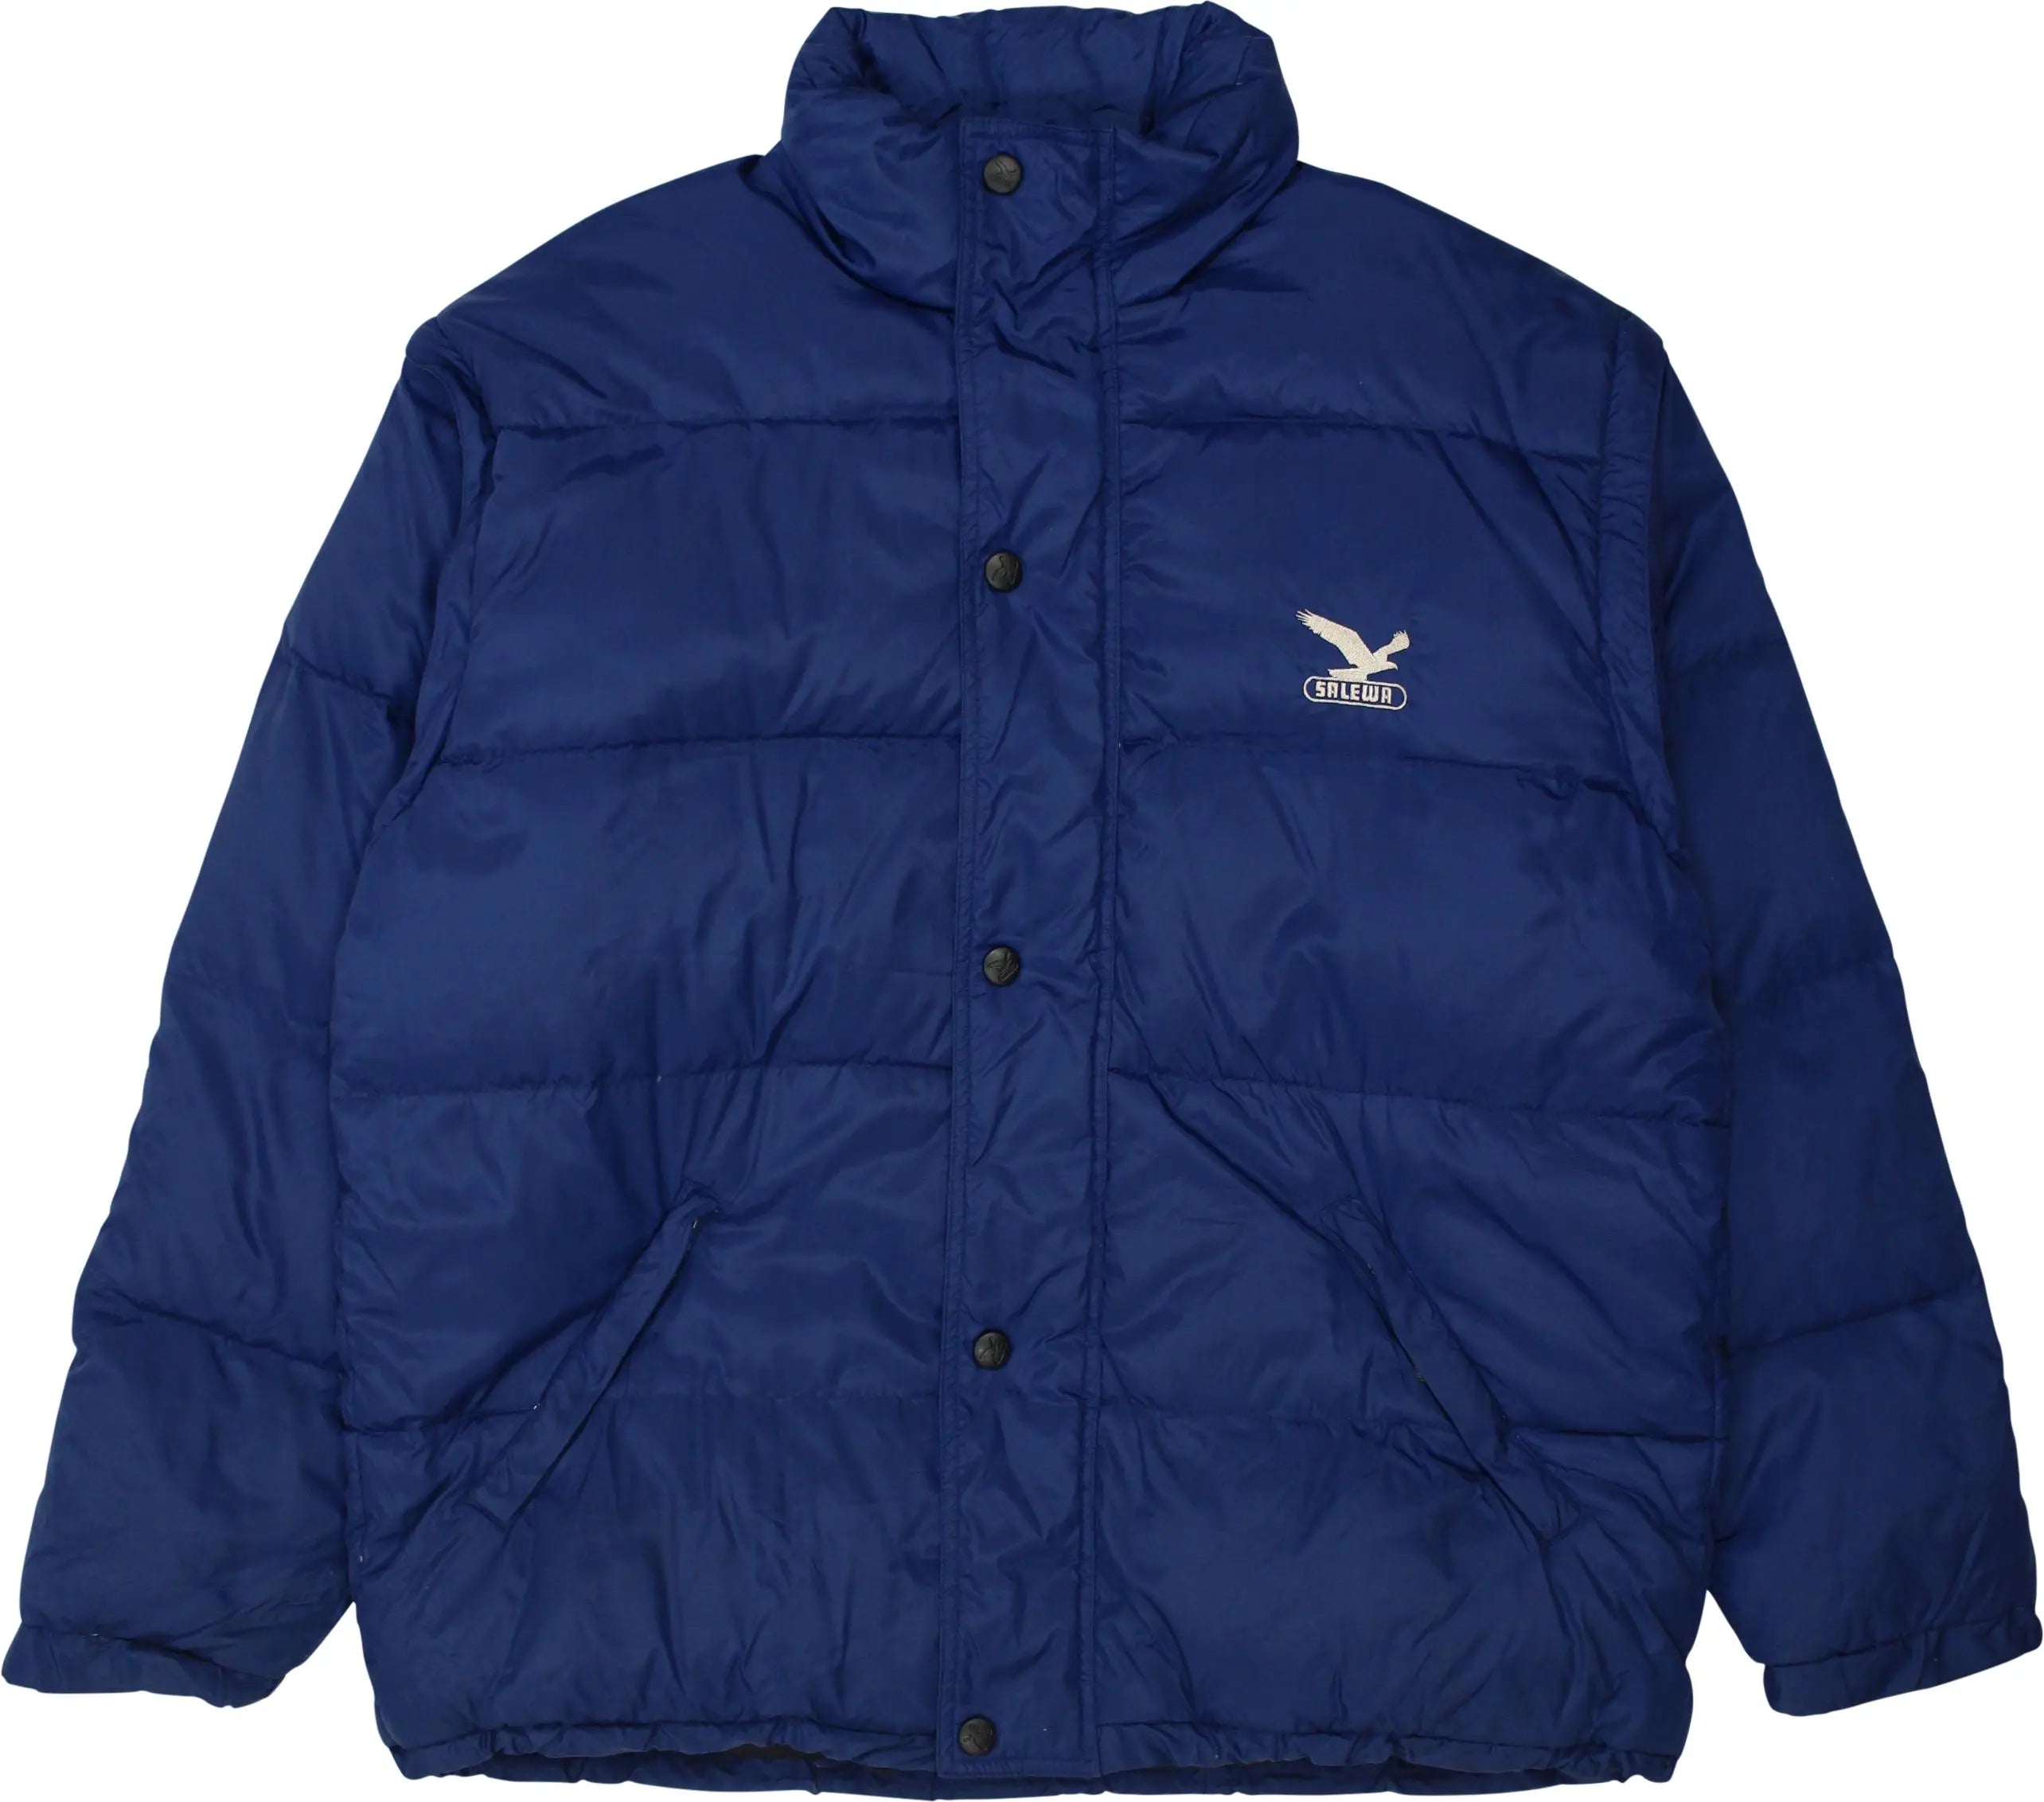 Salewa - Blue Puffer Jacket with Zip-off Sleeves- ThriftTale.com - Vintage and second handclothing